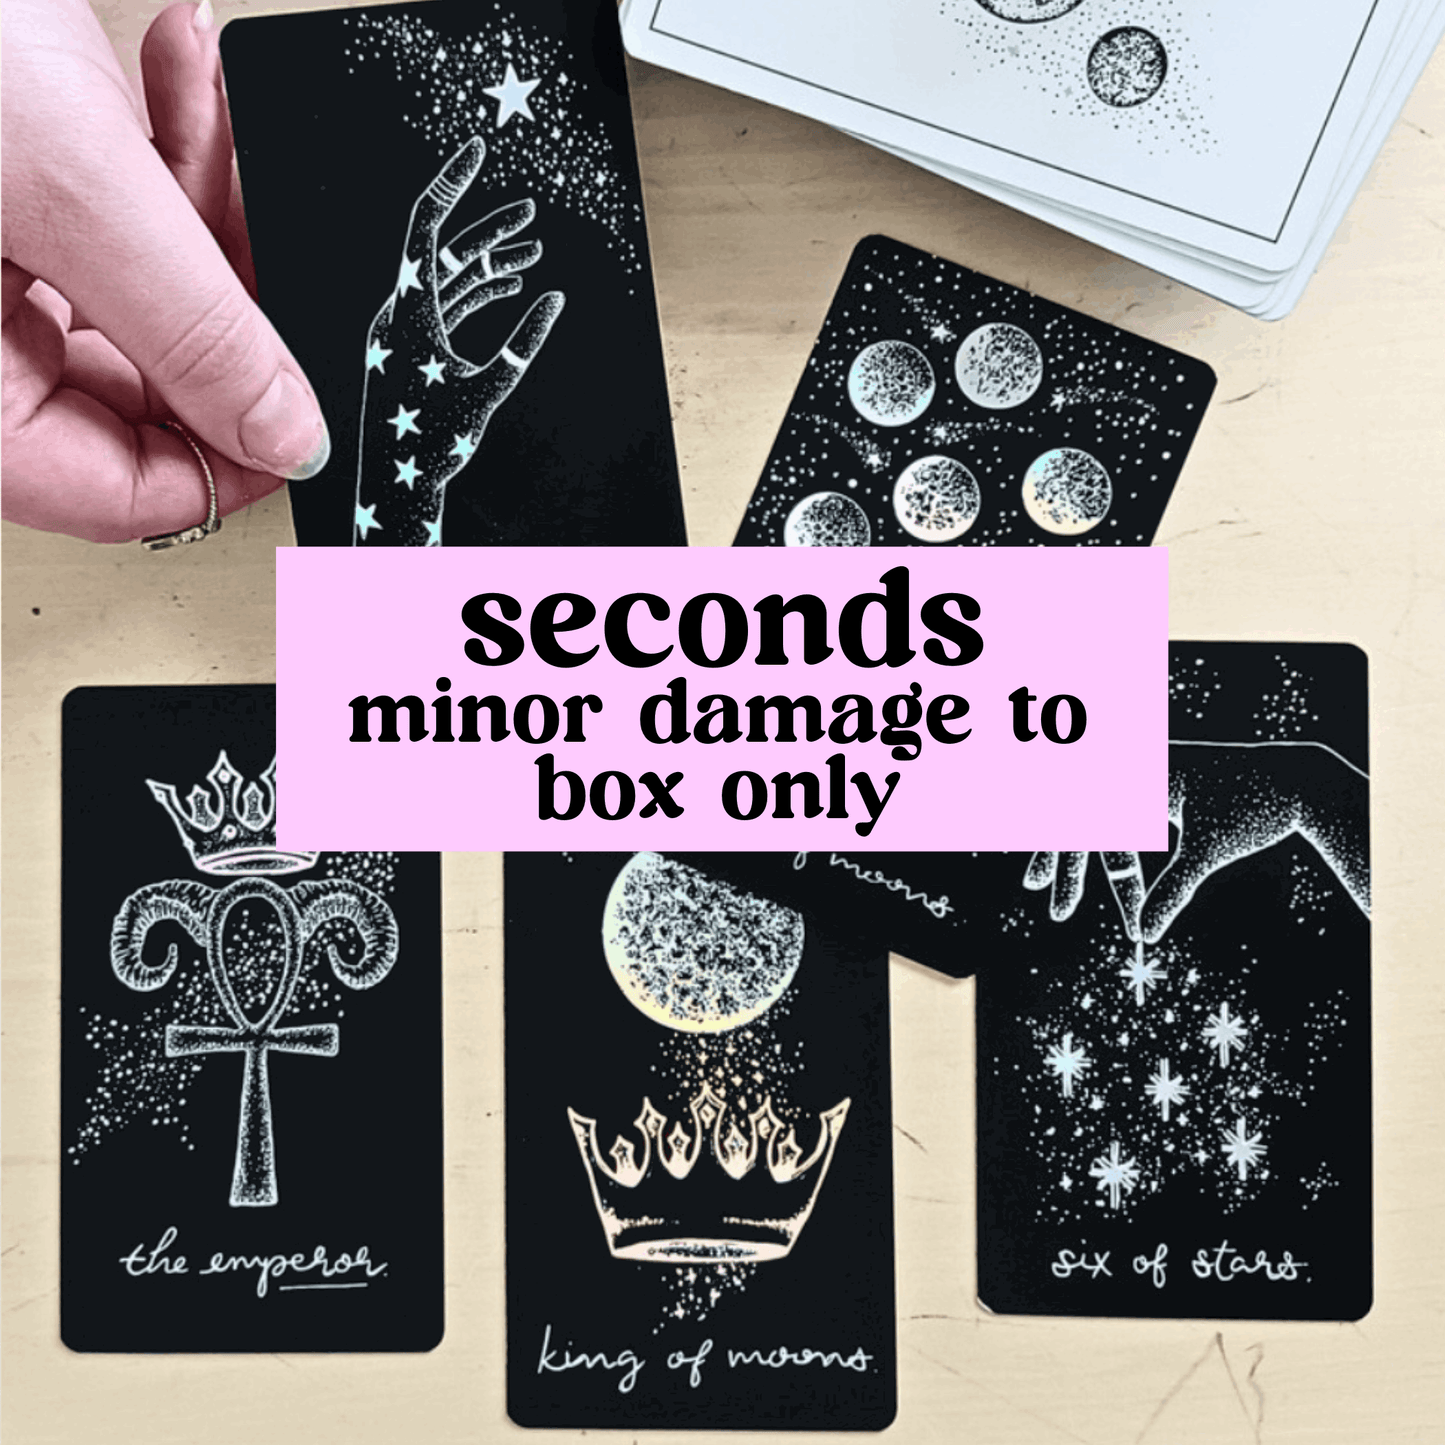 seconds - tarot deck: minor damage to box only.